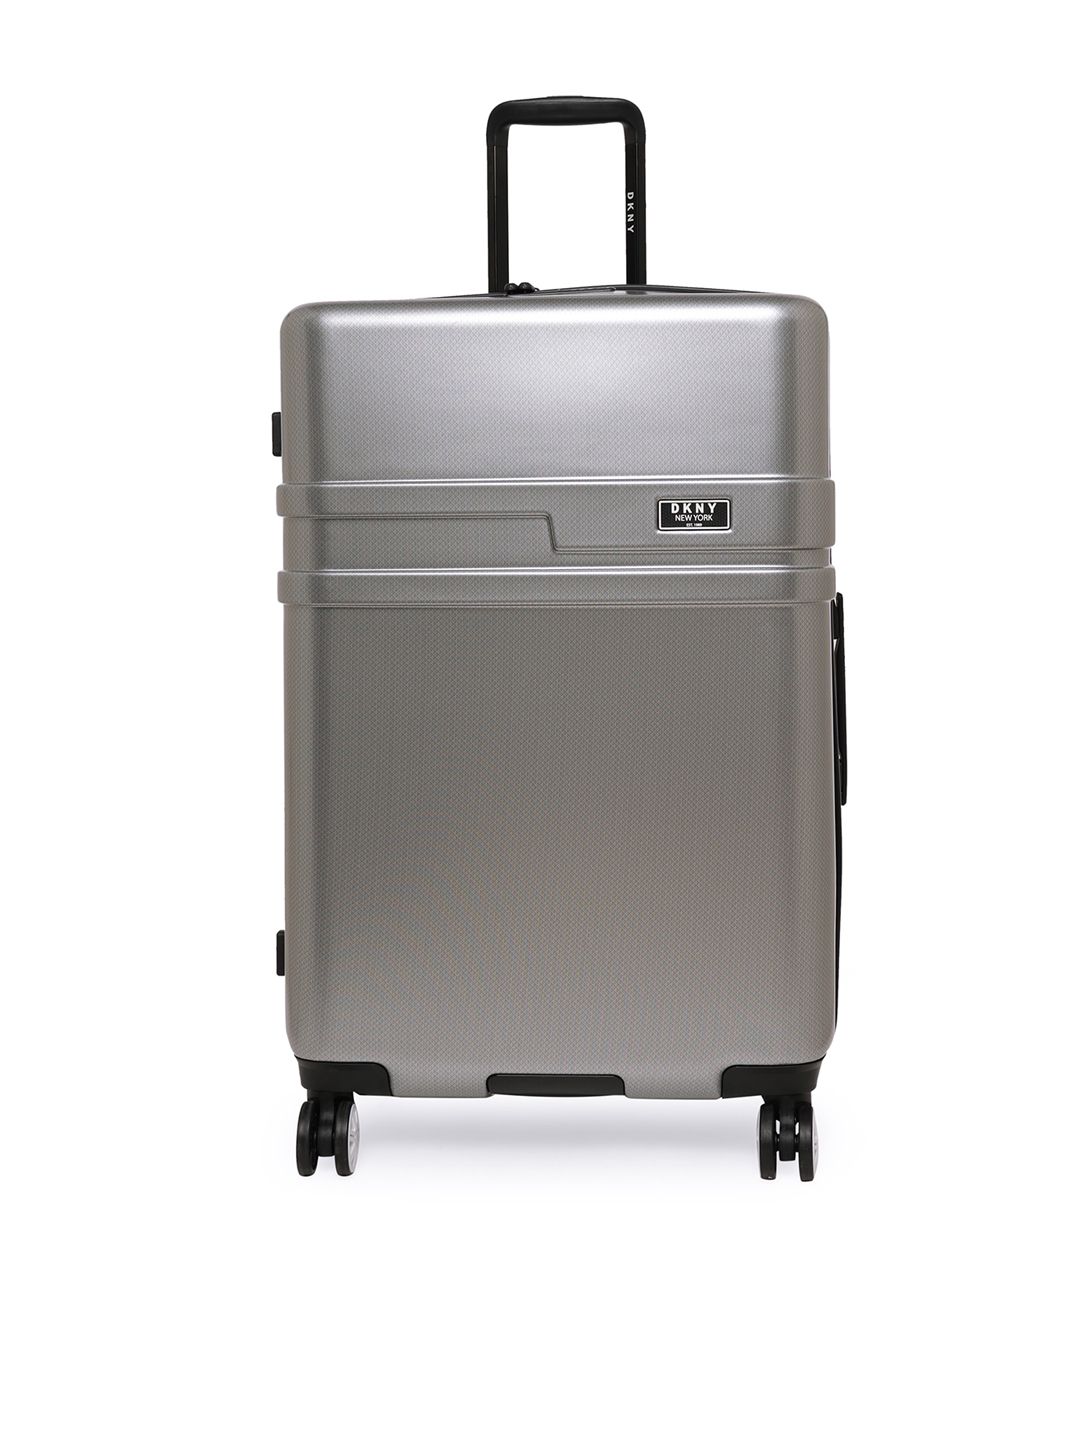 DKNY Silver-Toned Textured DASH Hard-Sided Medium Trolley Suitcase Price in India